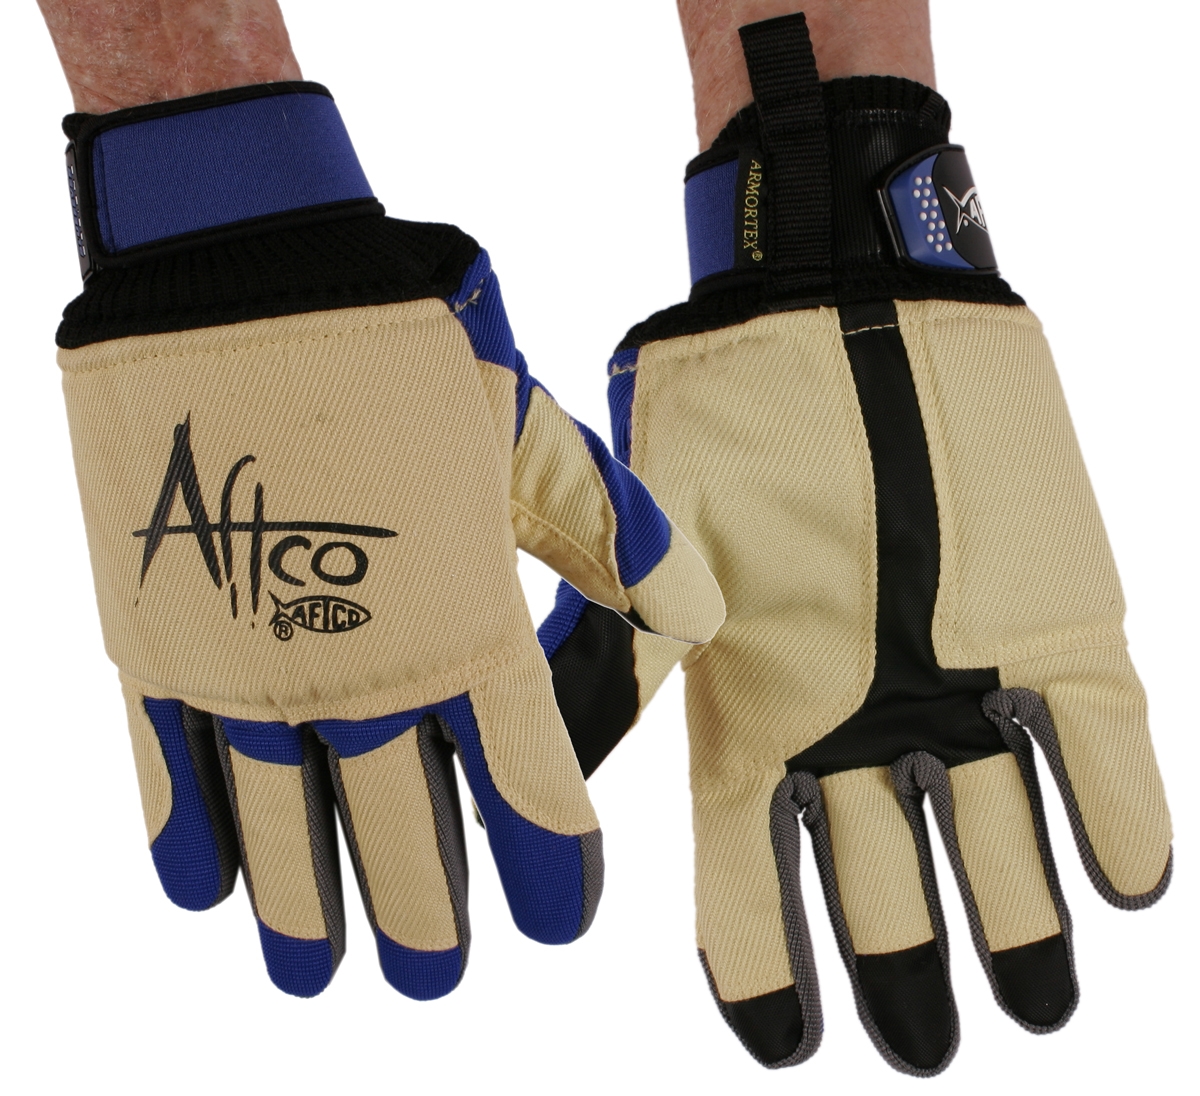 Aftco Fishing Gloves - WIREMAX